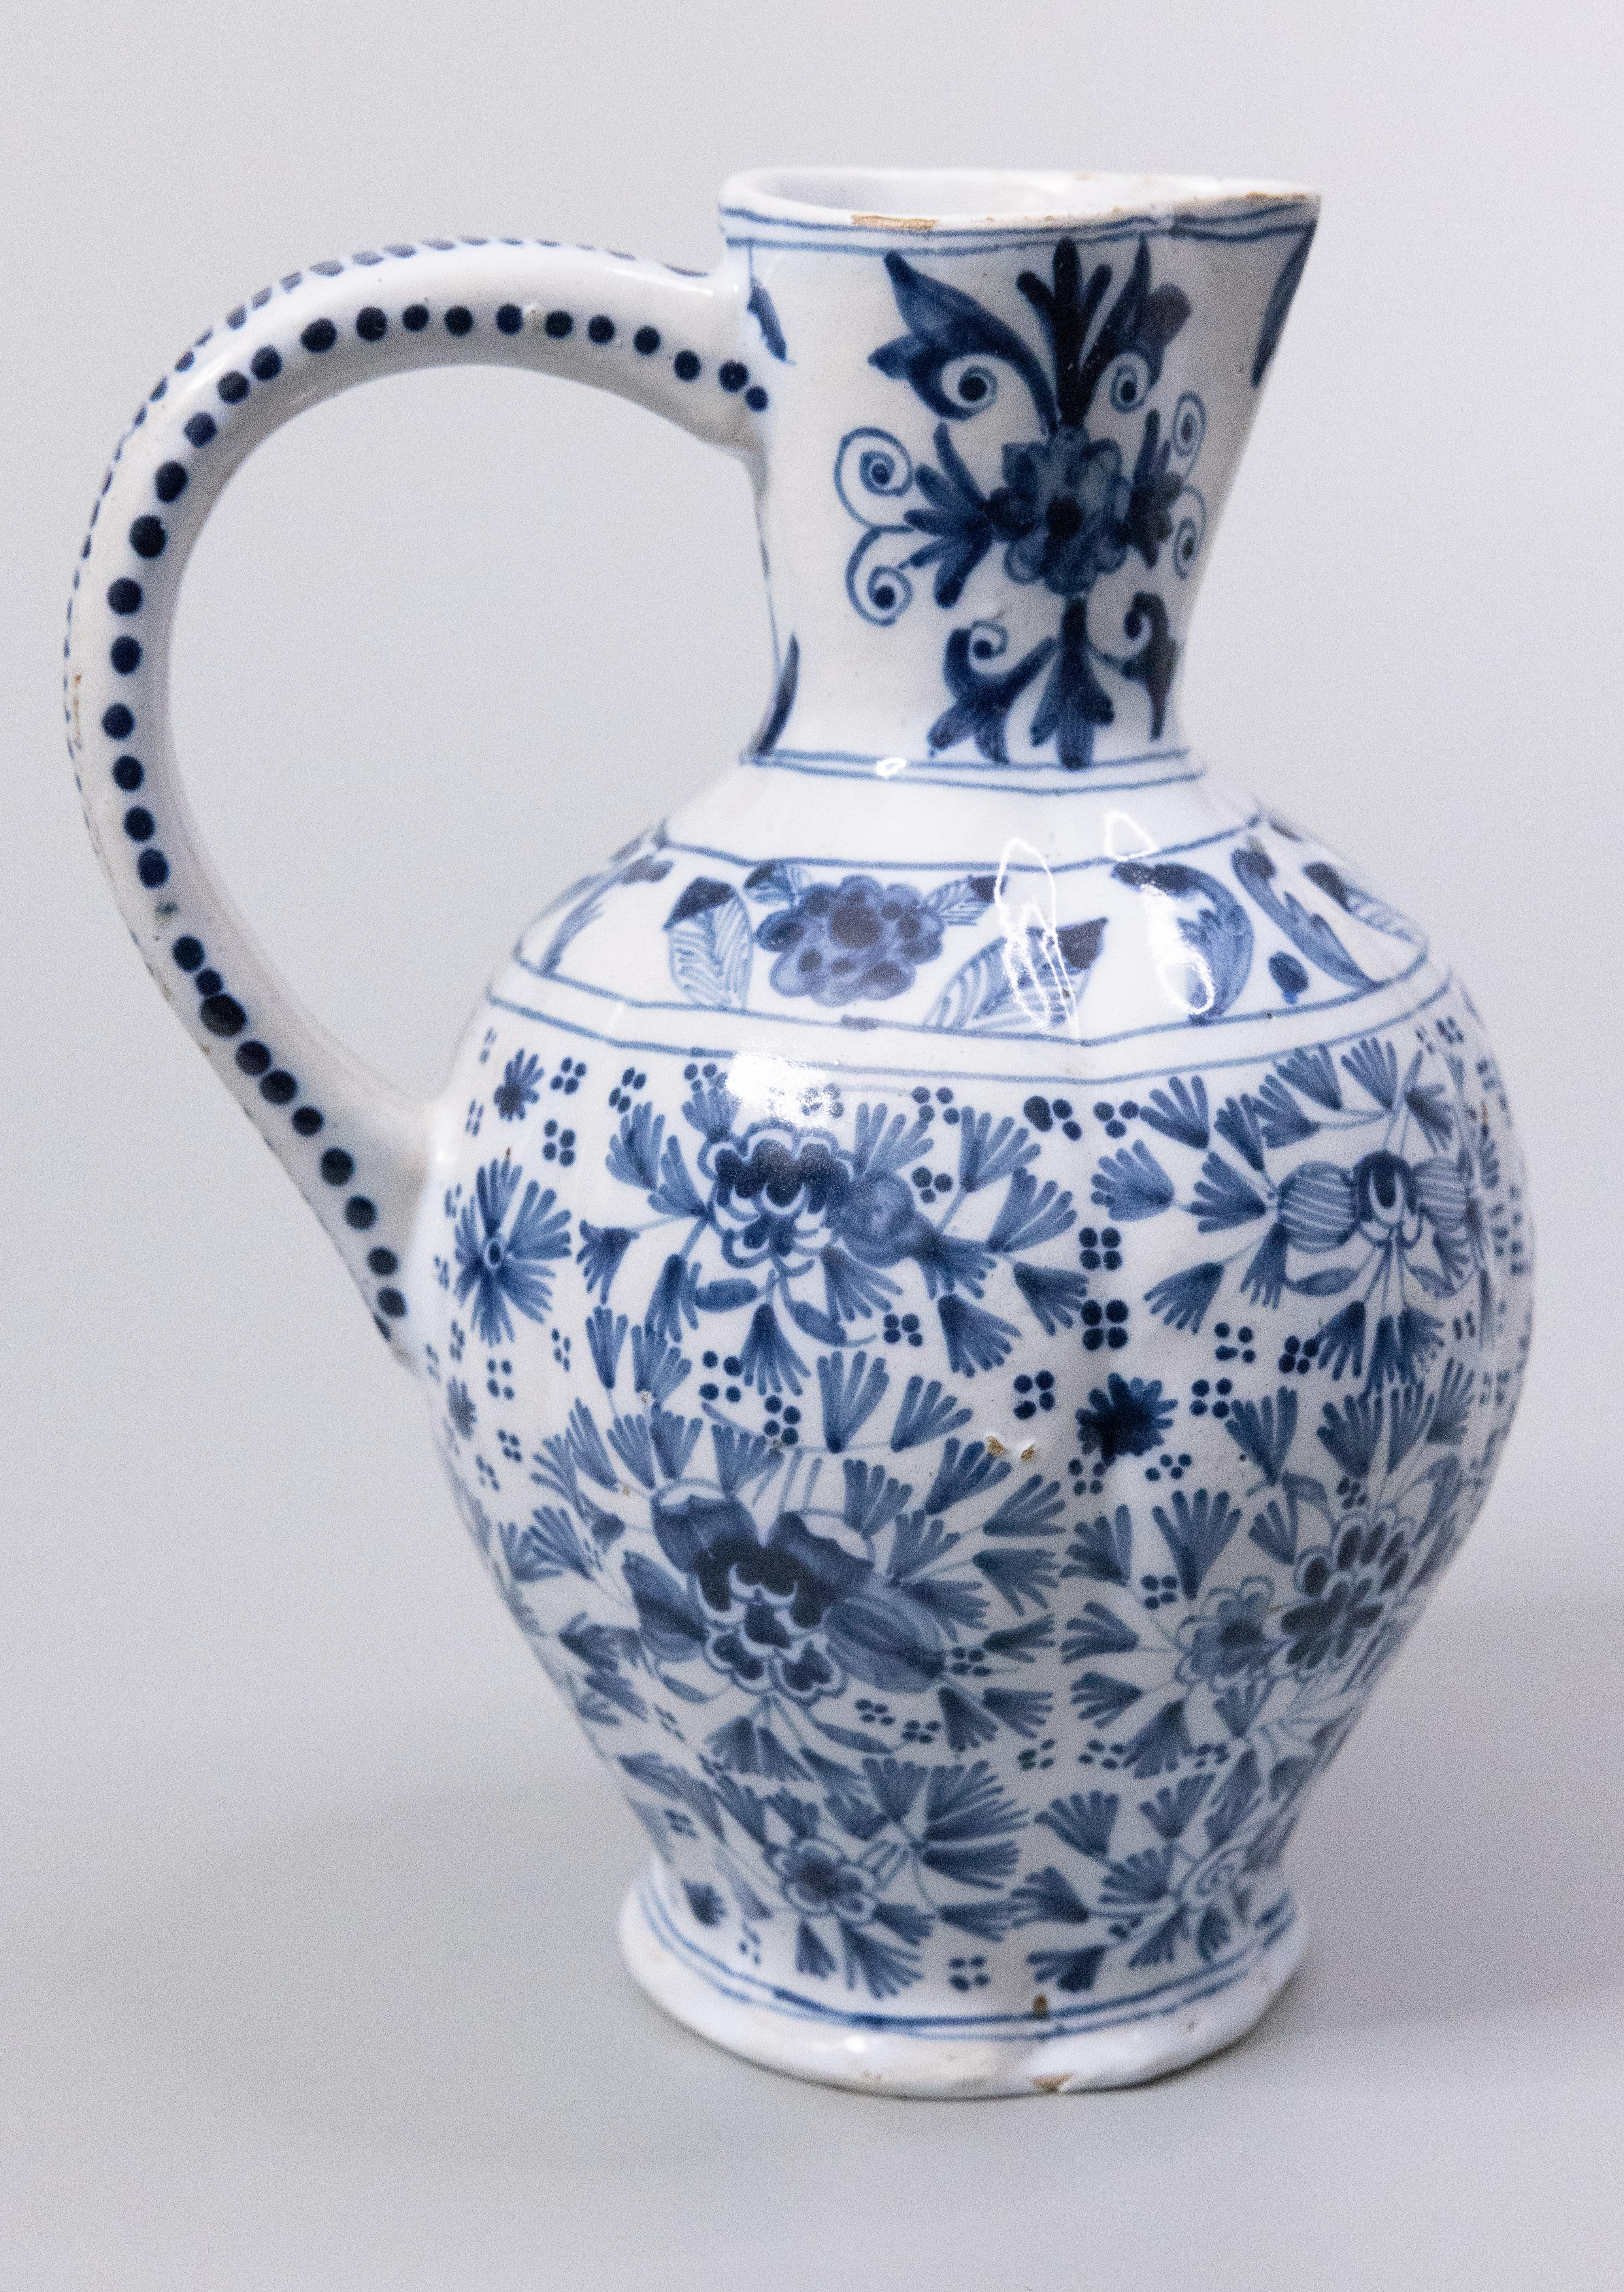 A superb antique 19th-Century Delft faience floral cobalt blue and white pitcher. Signed on the reverse. This gorgeous wine jug or ewer has a wonderful lobed shape with fine hand painted leaves and flowers. It would be lovely with a bouquet of